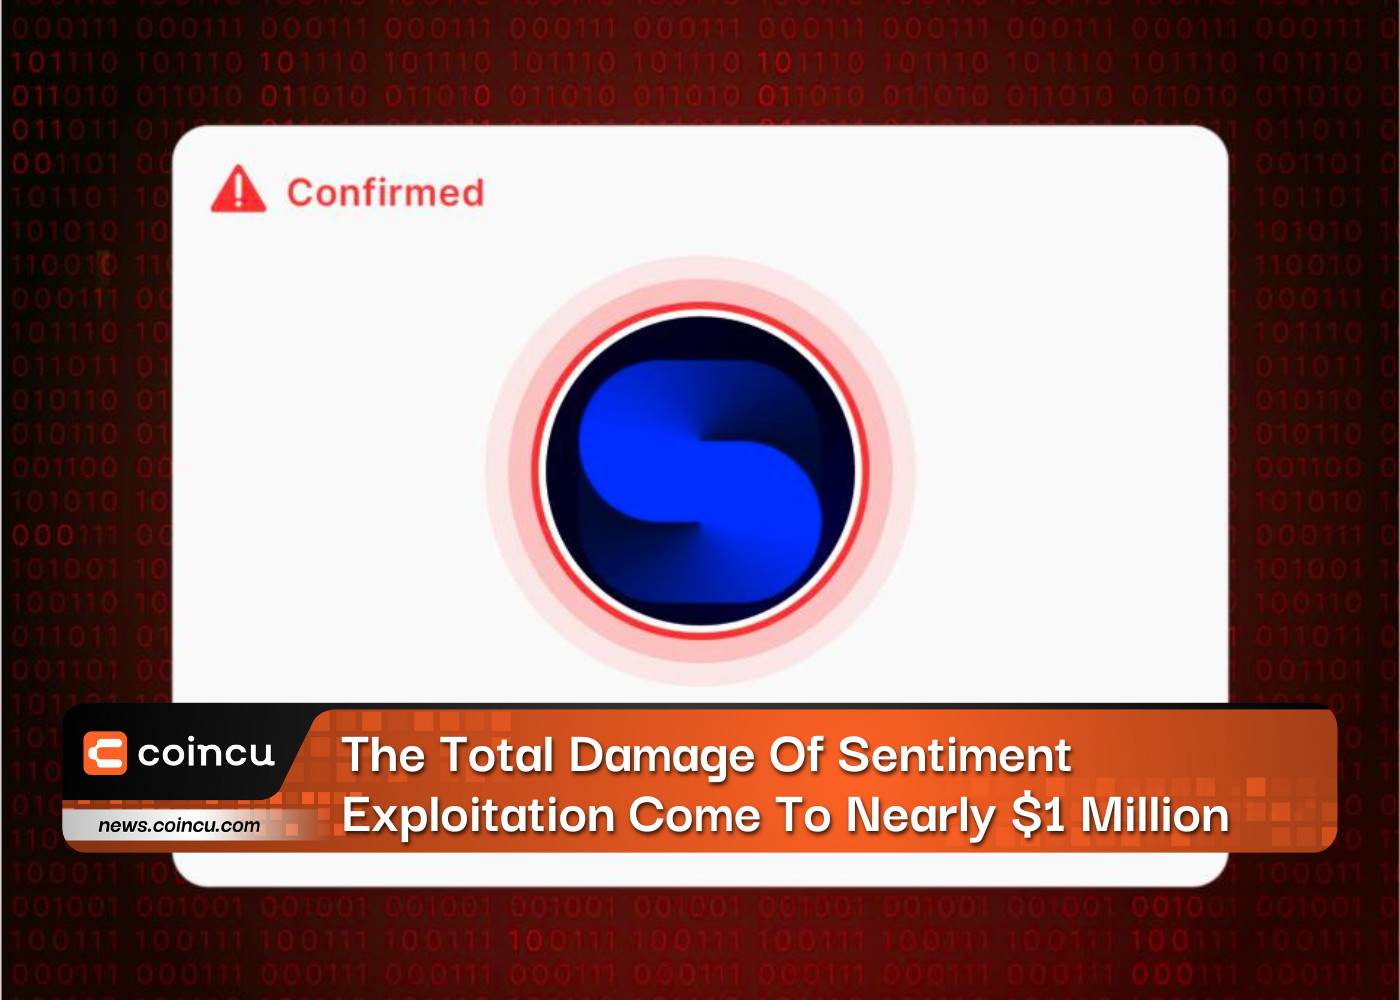 The Total Damage Of Sentiment Exploitation Come To Nearly $1 Million